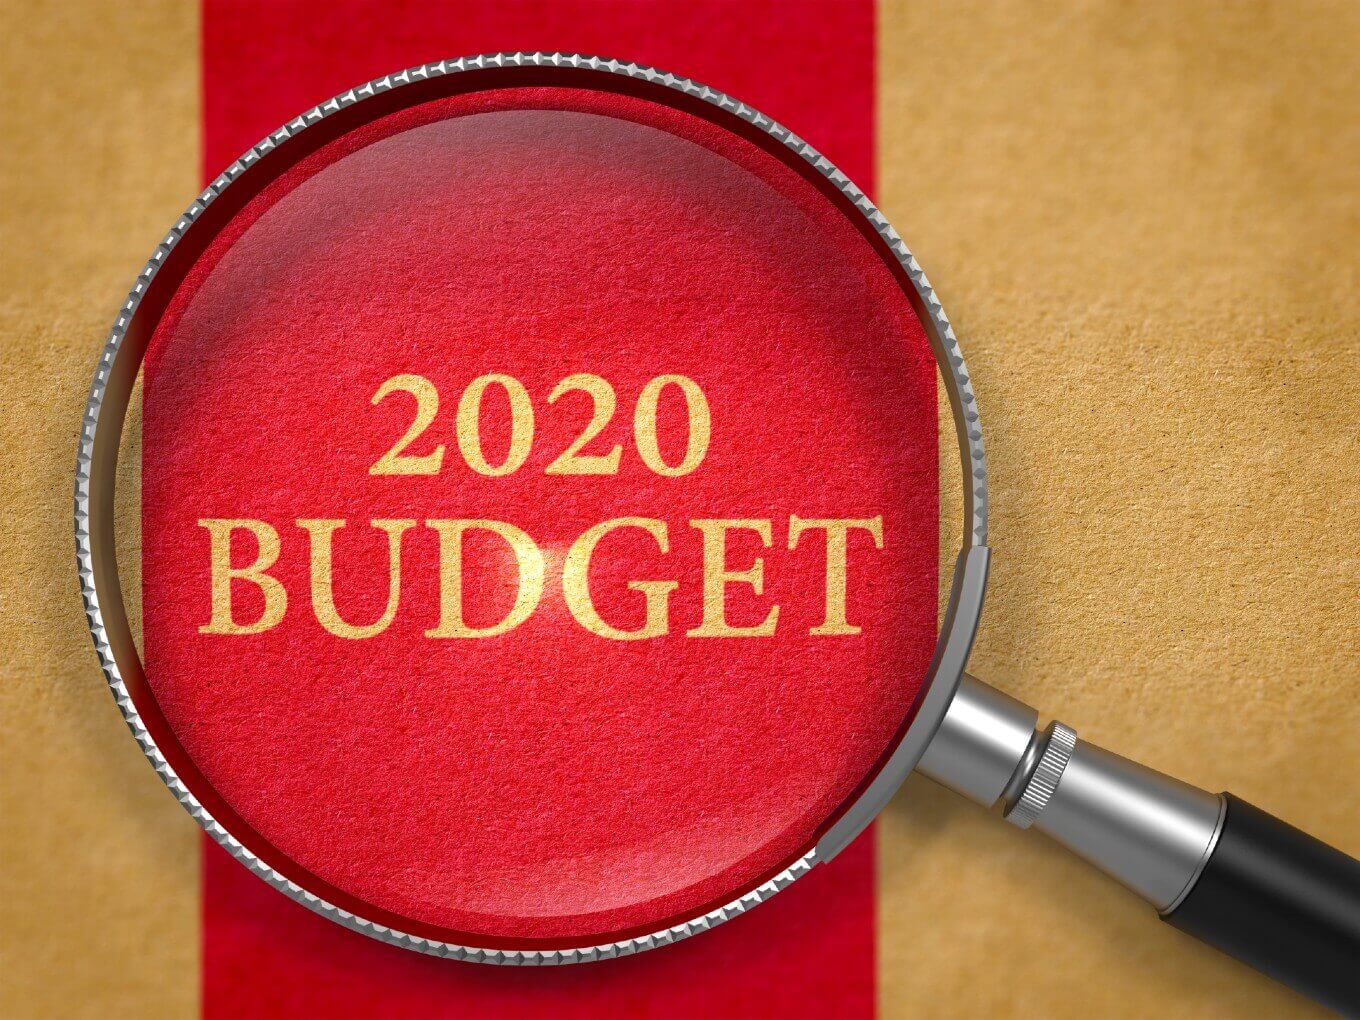 Union Budget 2020: Impact On MSME's And Startups